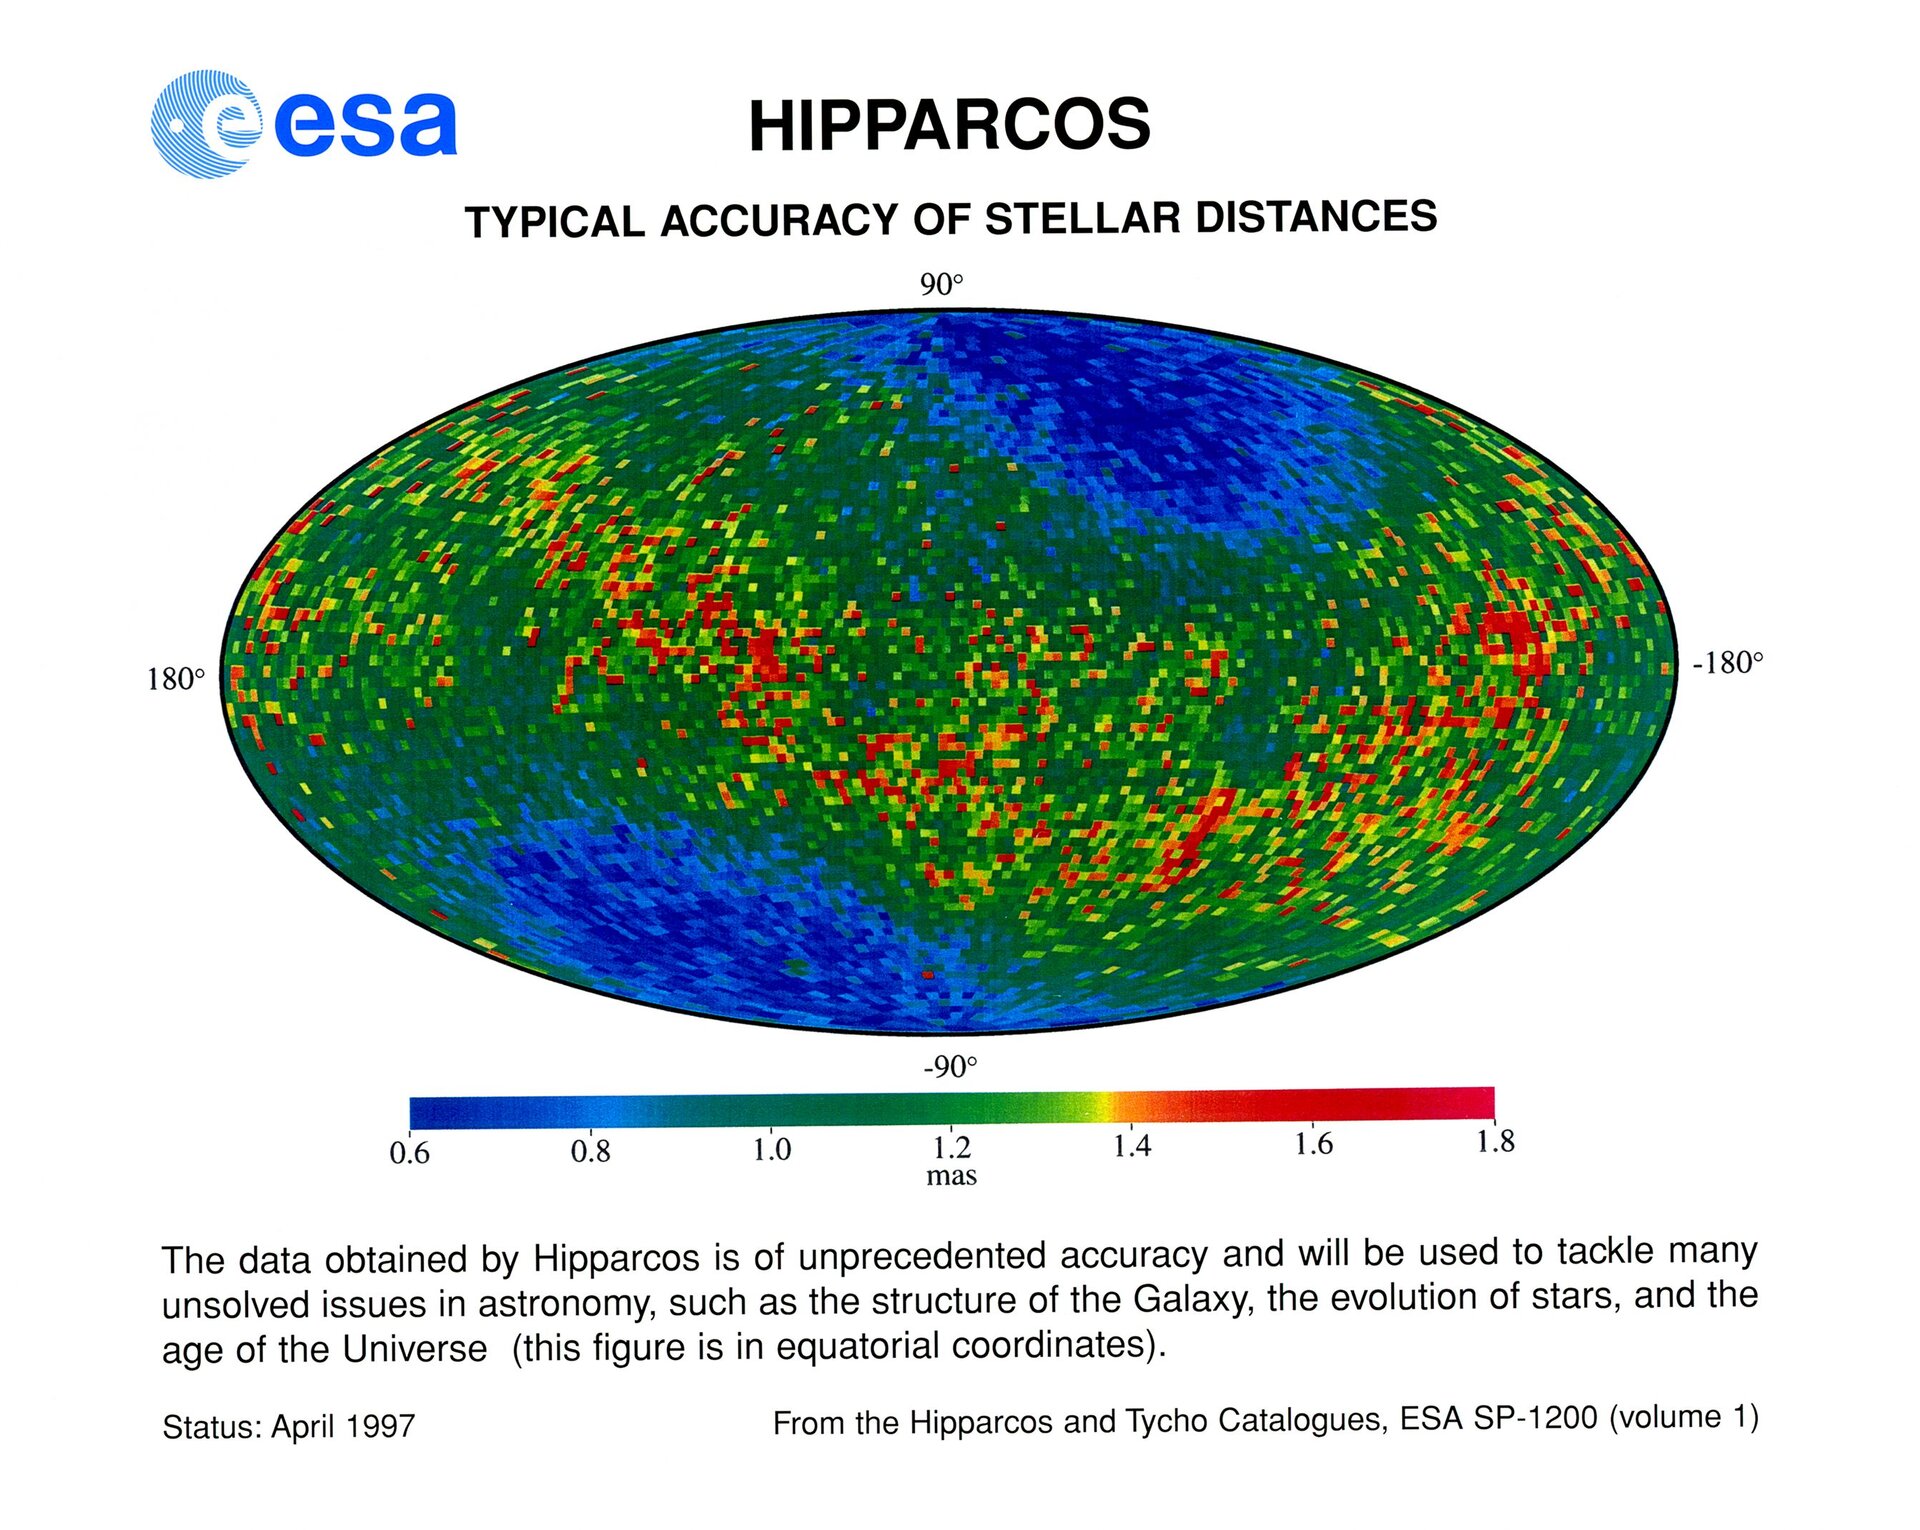 Hipparcos result - typical accuracy of stellar distances.